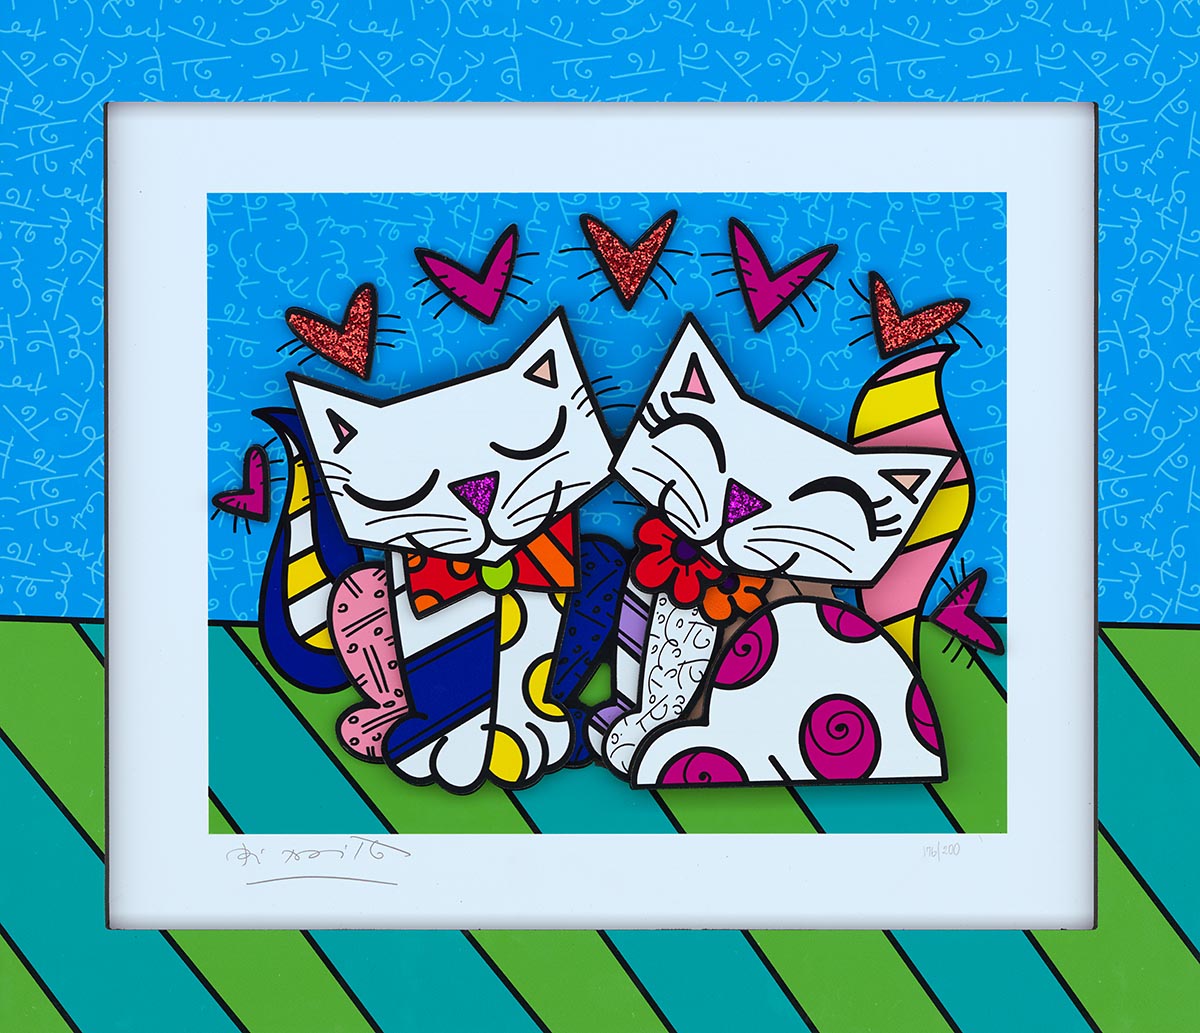 "Pure" (2019) - one of Britto's new sculptographs